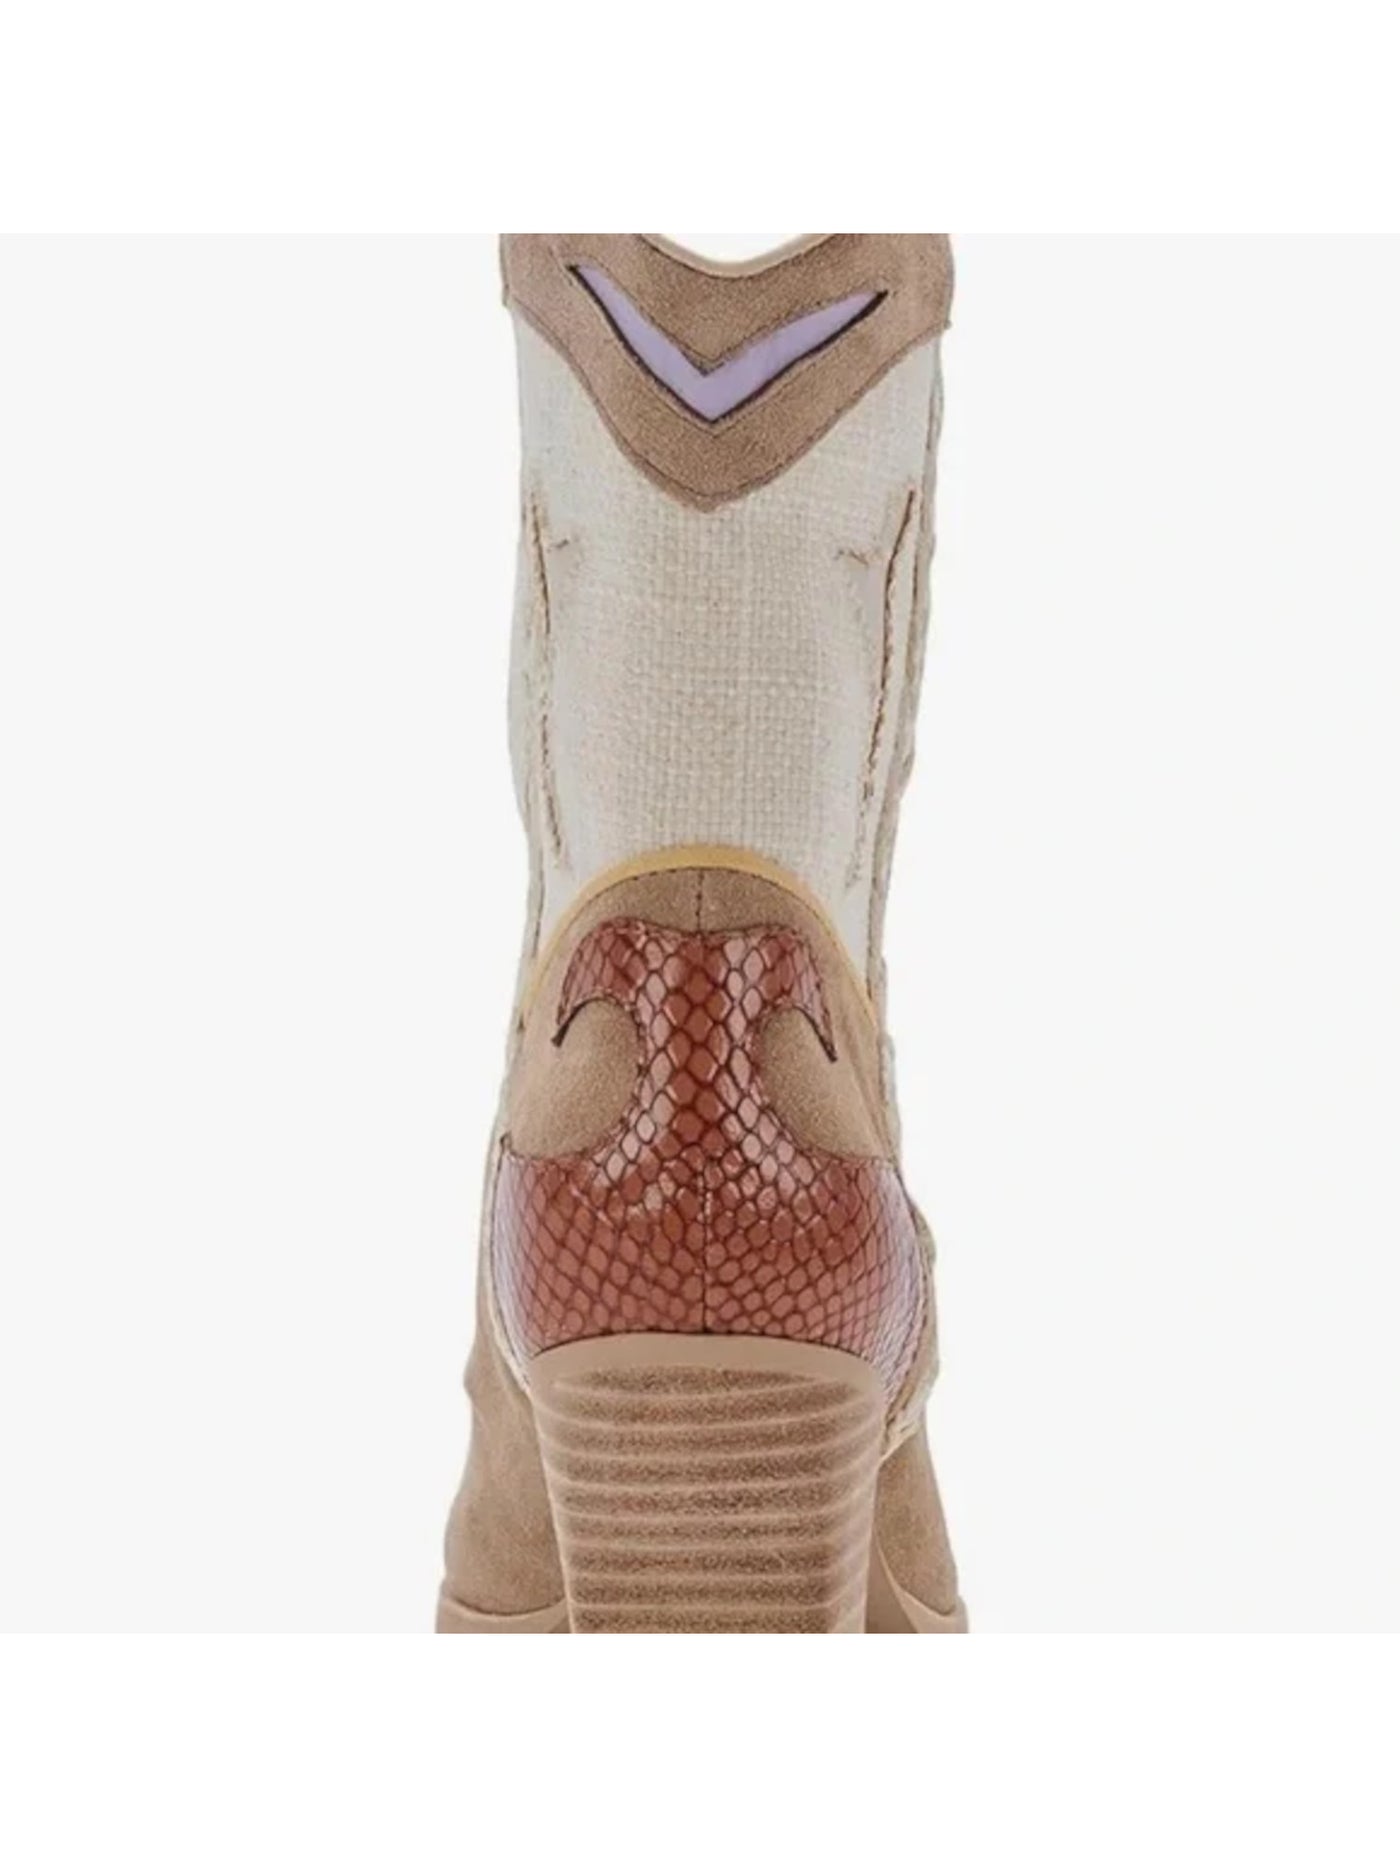 DOLCE VITA Womens Beige Colorblocked Stripe Padded Loral Pointed Toe Stacked Heel Leather Dress Western Boot 11 M